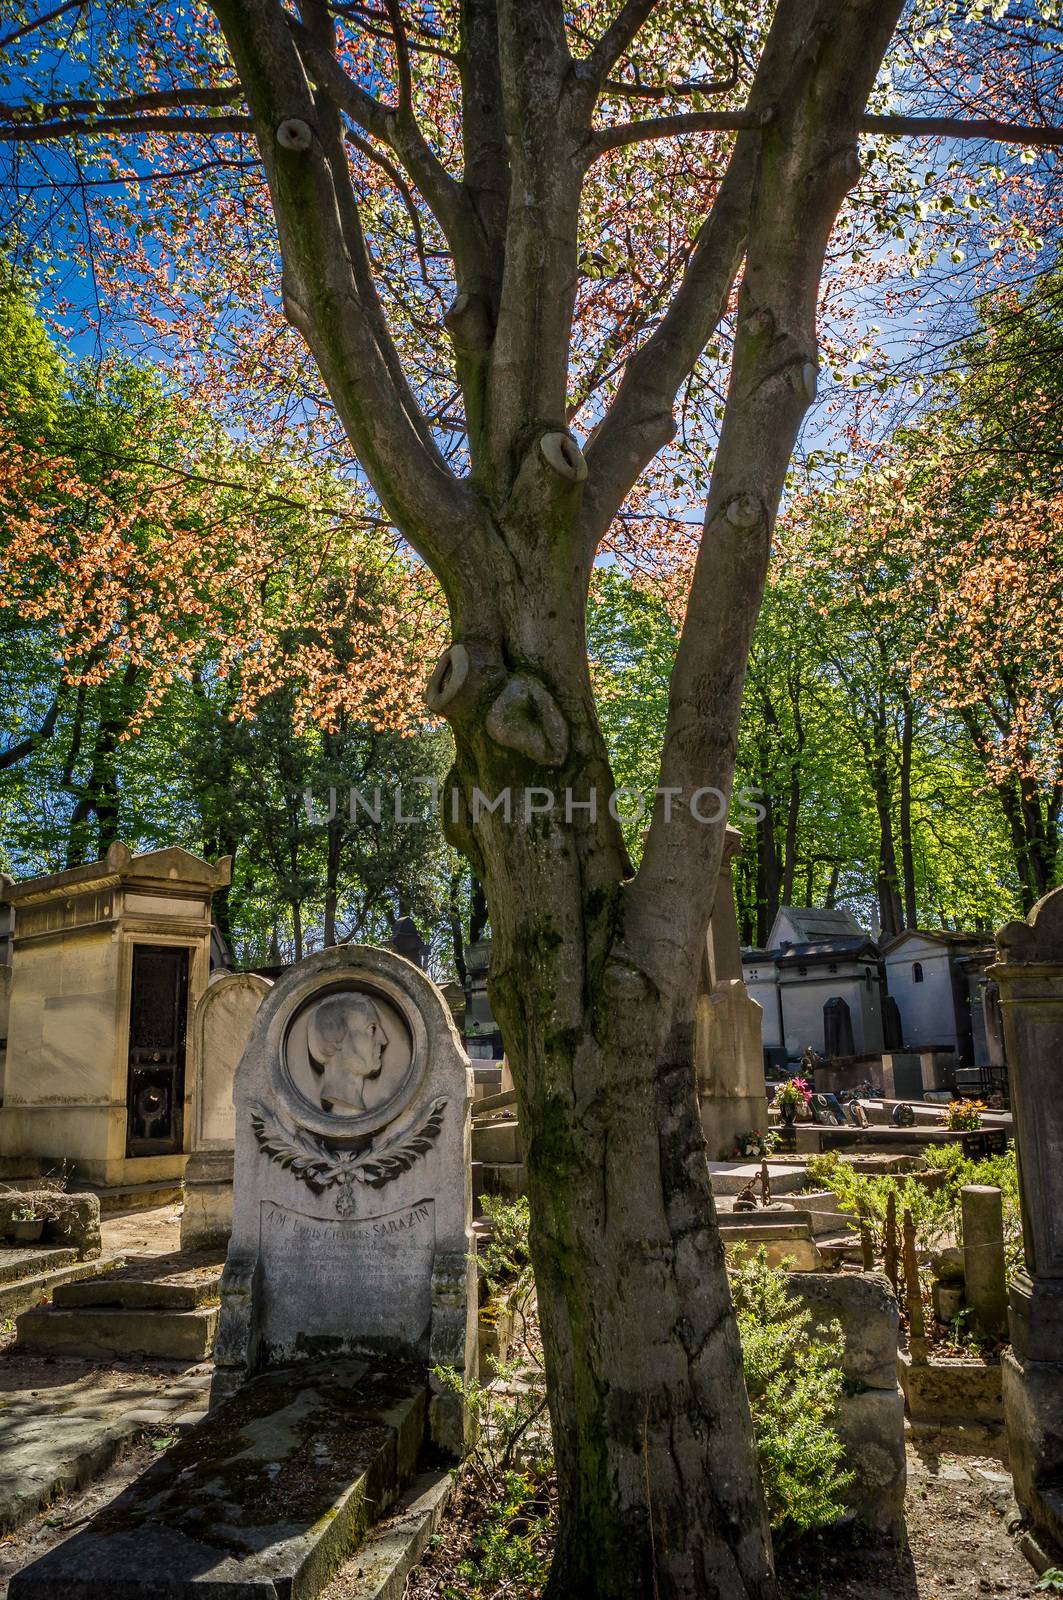 Tombstone in a cemetery in the autumn